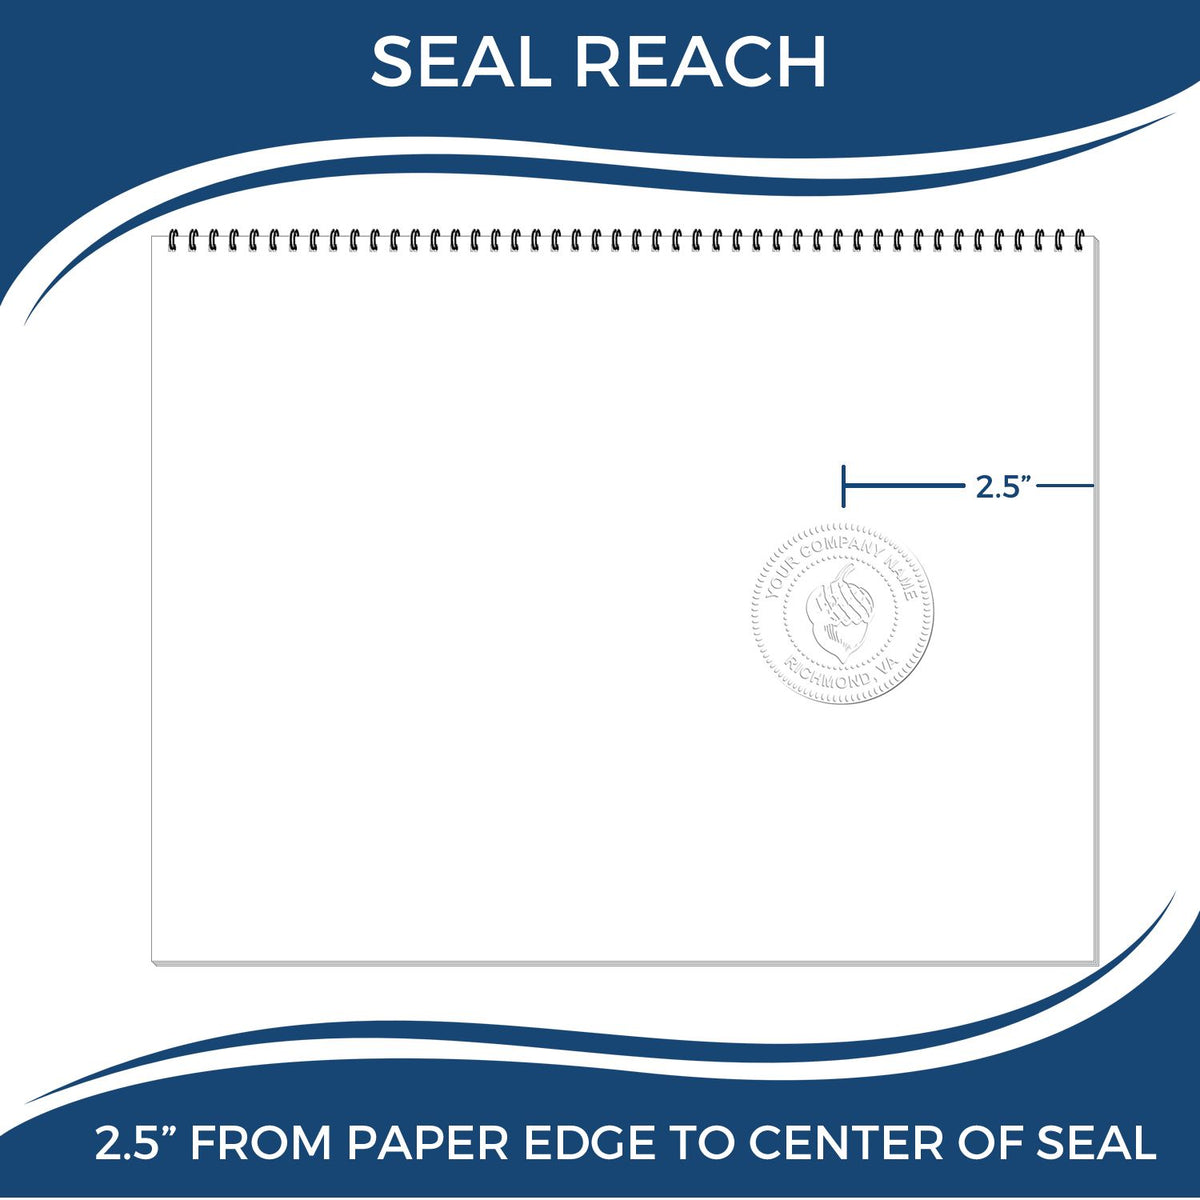 An infographic showing the seal reach which is represented by a ruler and a miniature seal image of the Long Reach Alaska Geology Seal